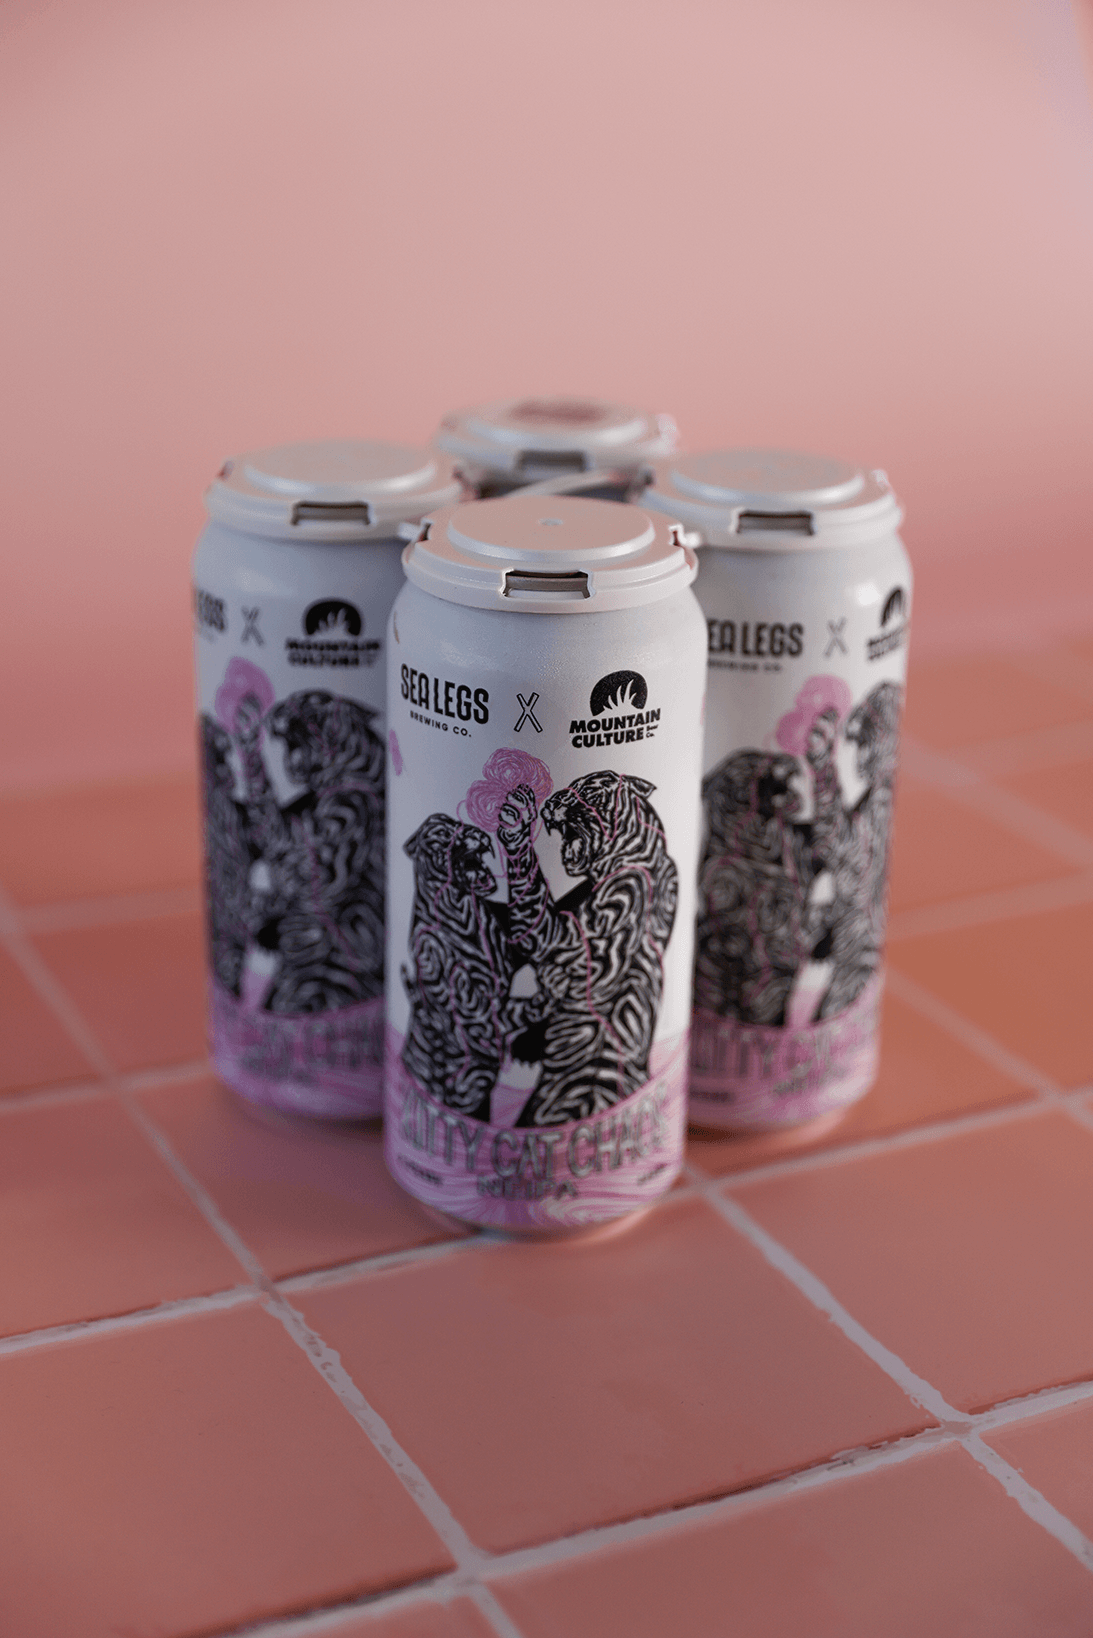 Kitty Cat Chaos NEIPA - Sea Legs X  Mountain Culture Collab - Limited Release